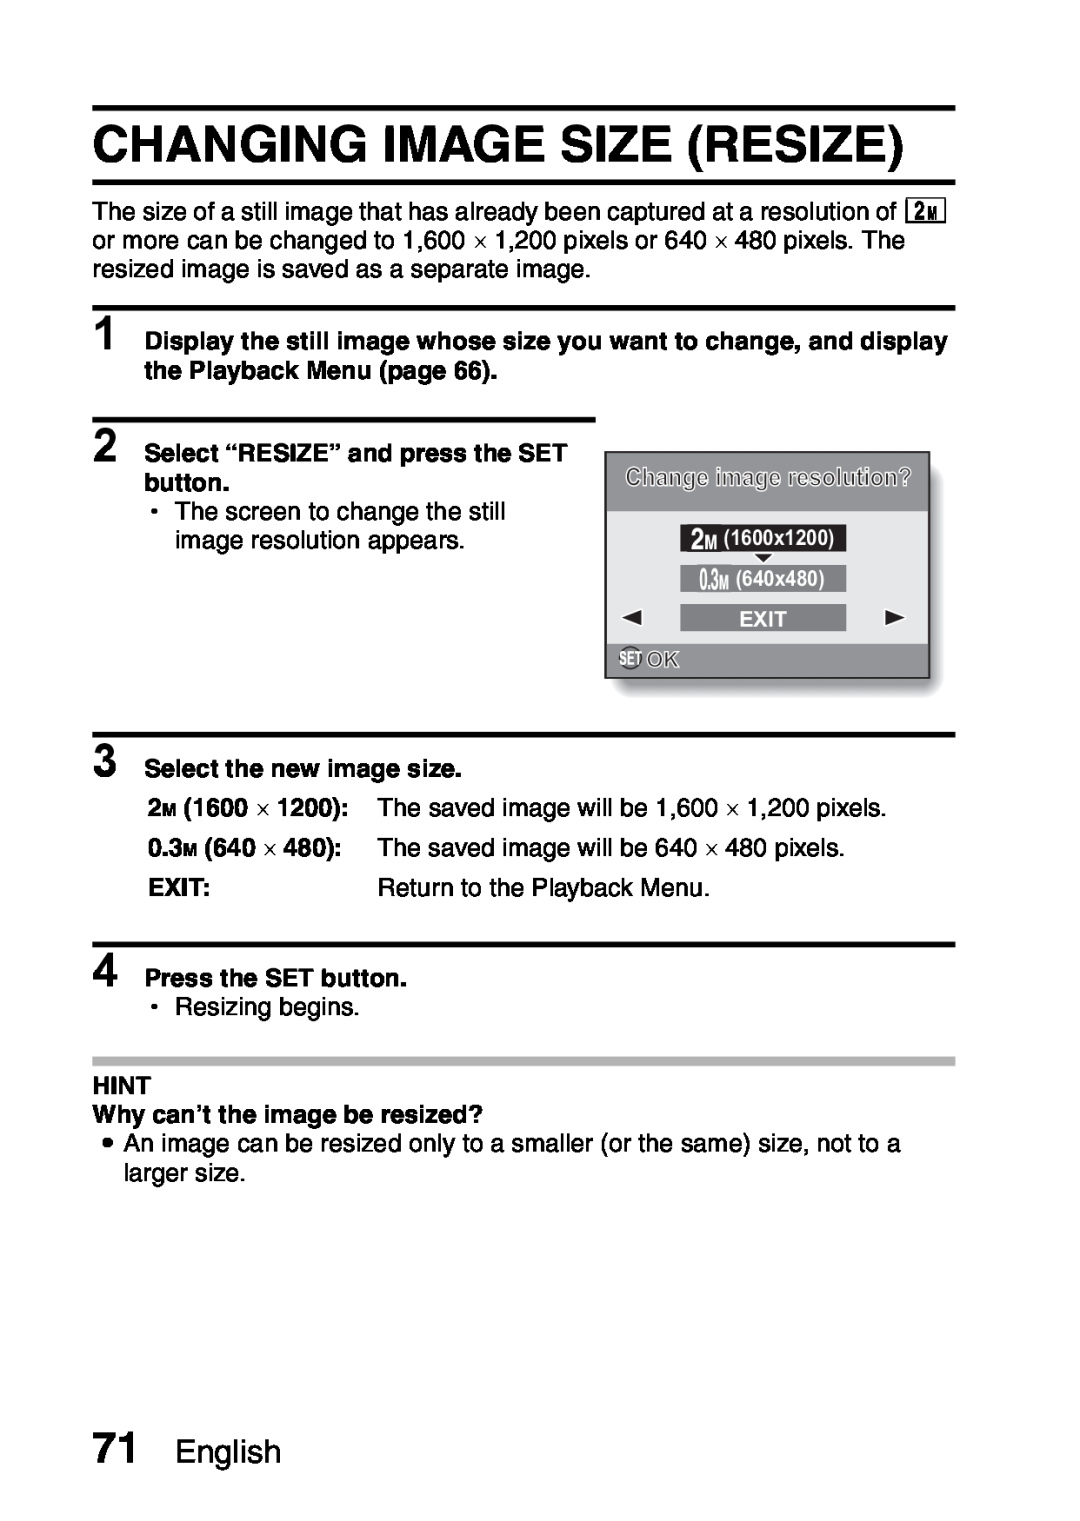 Sanyo VPC-S60 Changing Image Size Resize, English, the Playback Menu page, Select “RESIZE” and press the SET, button 